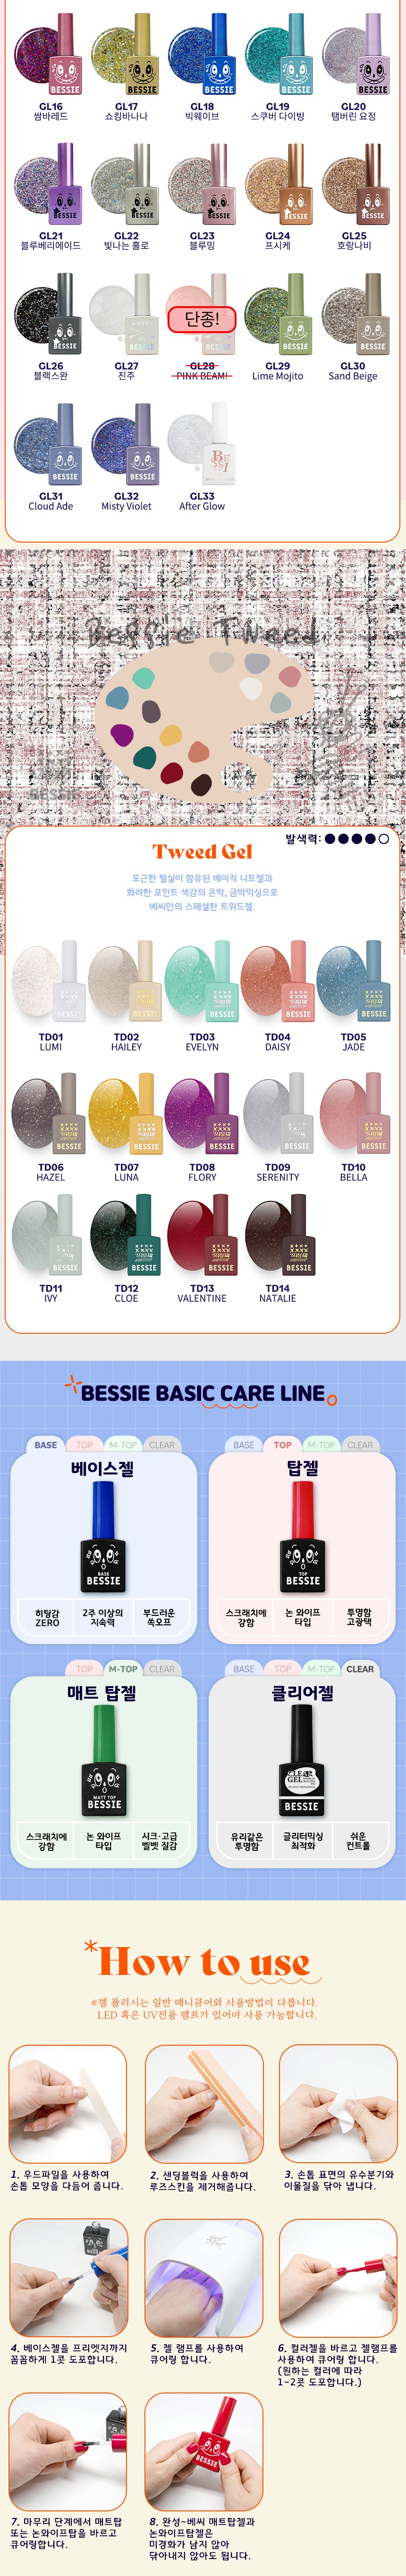 BESSIE Colour Gel - Full Collection